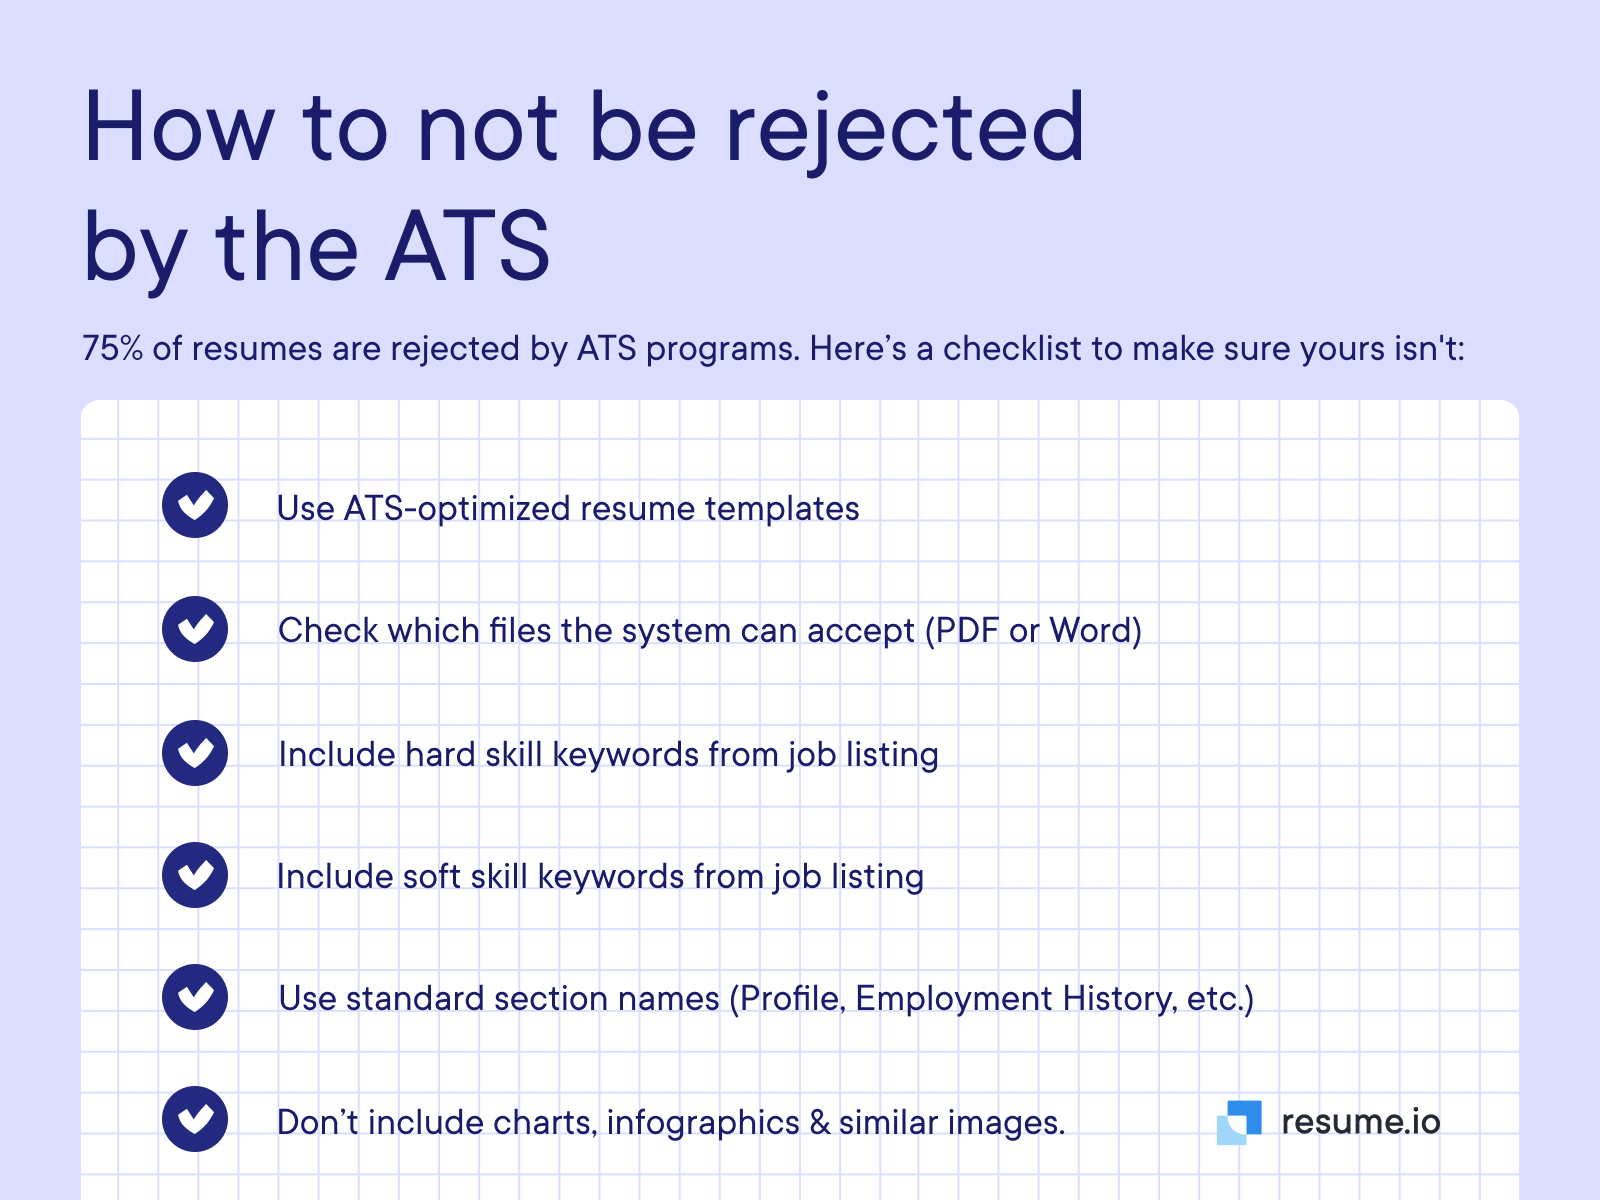 How to not be rejected by the ATS